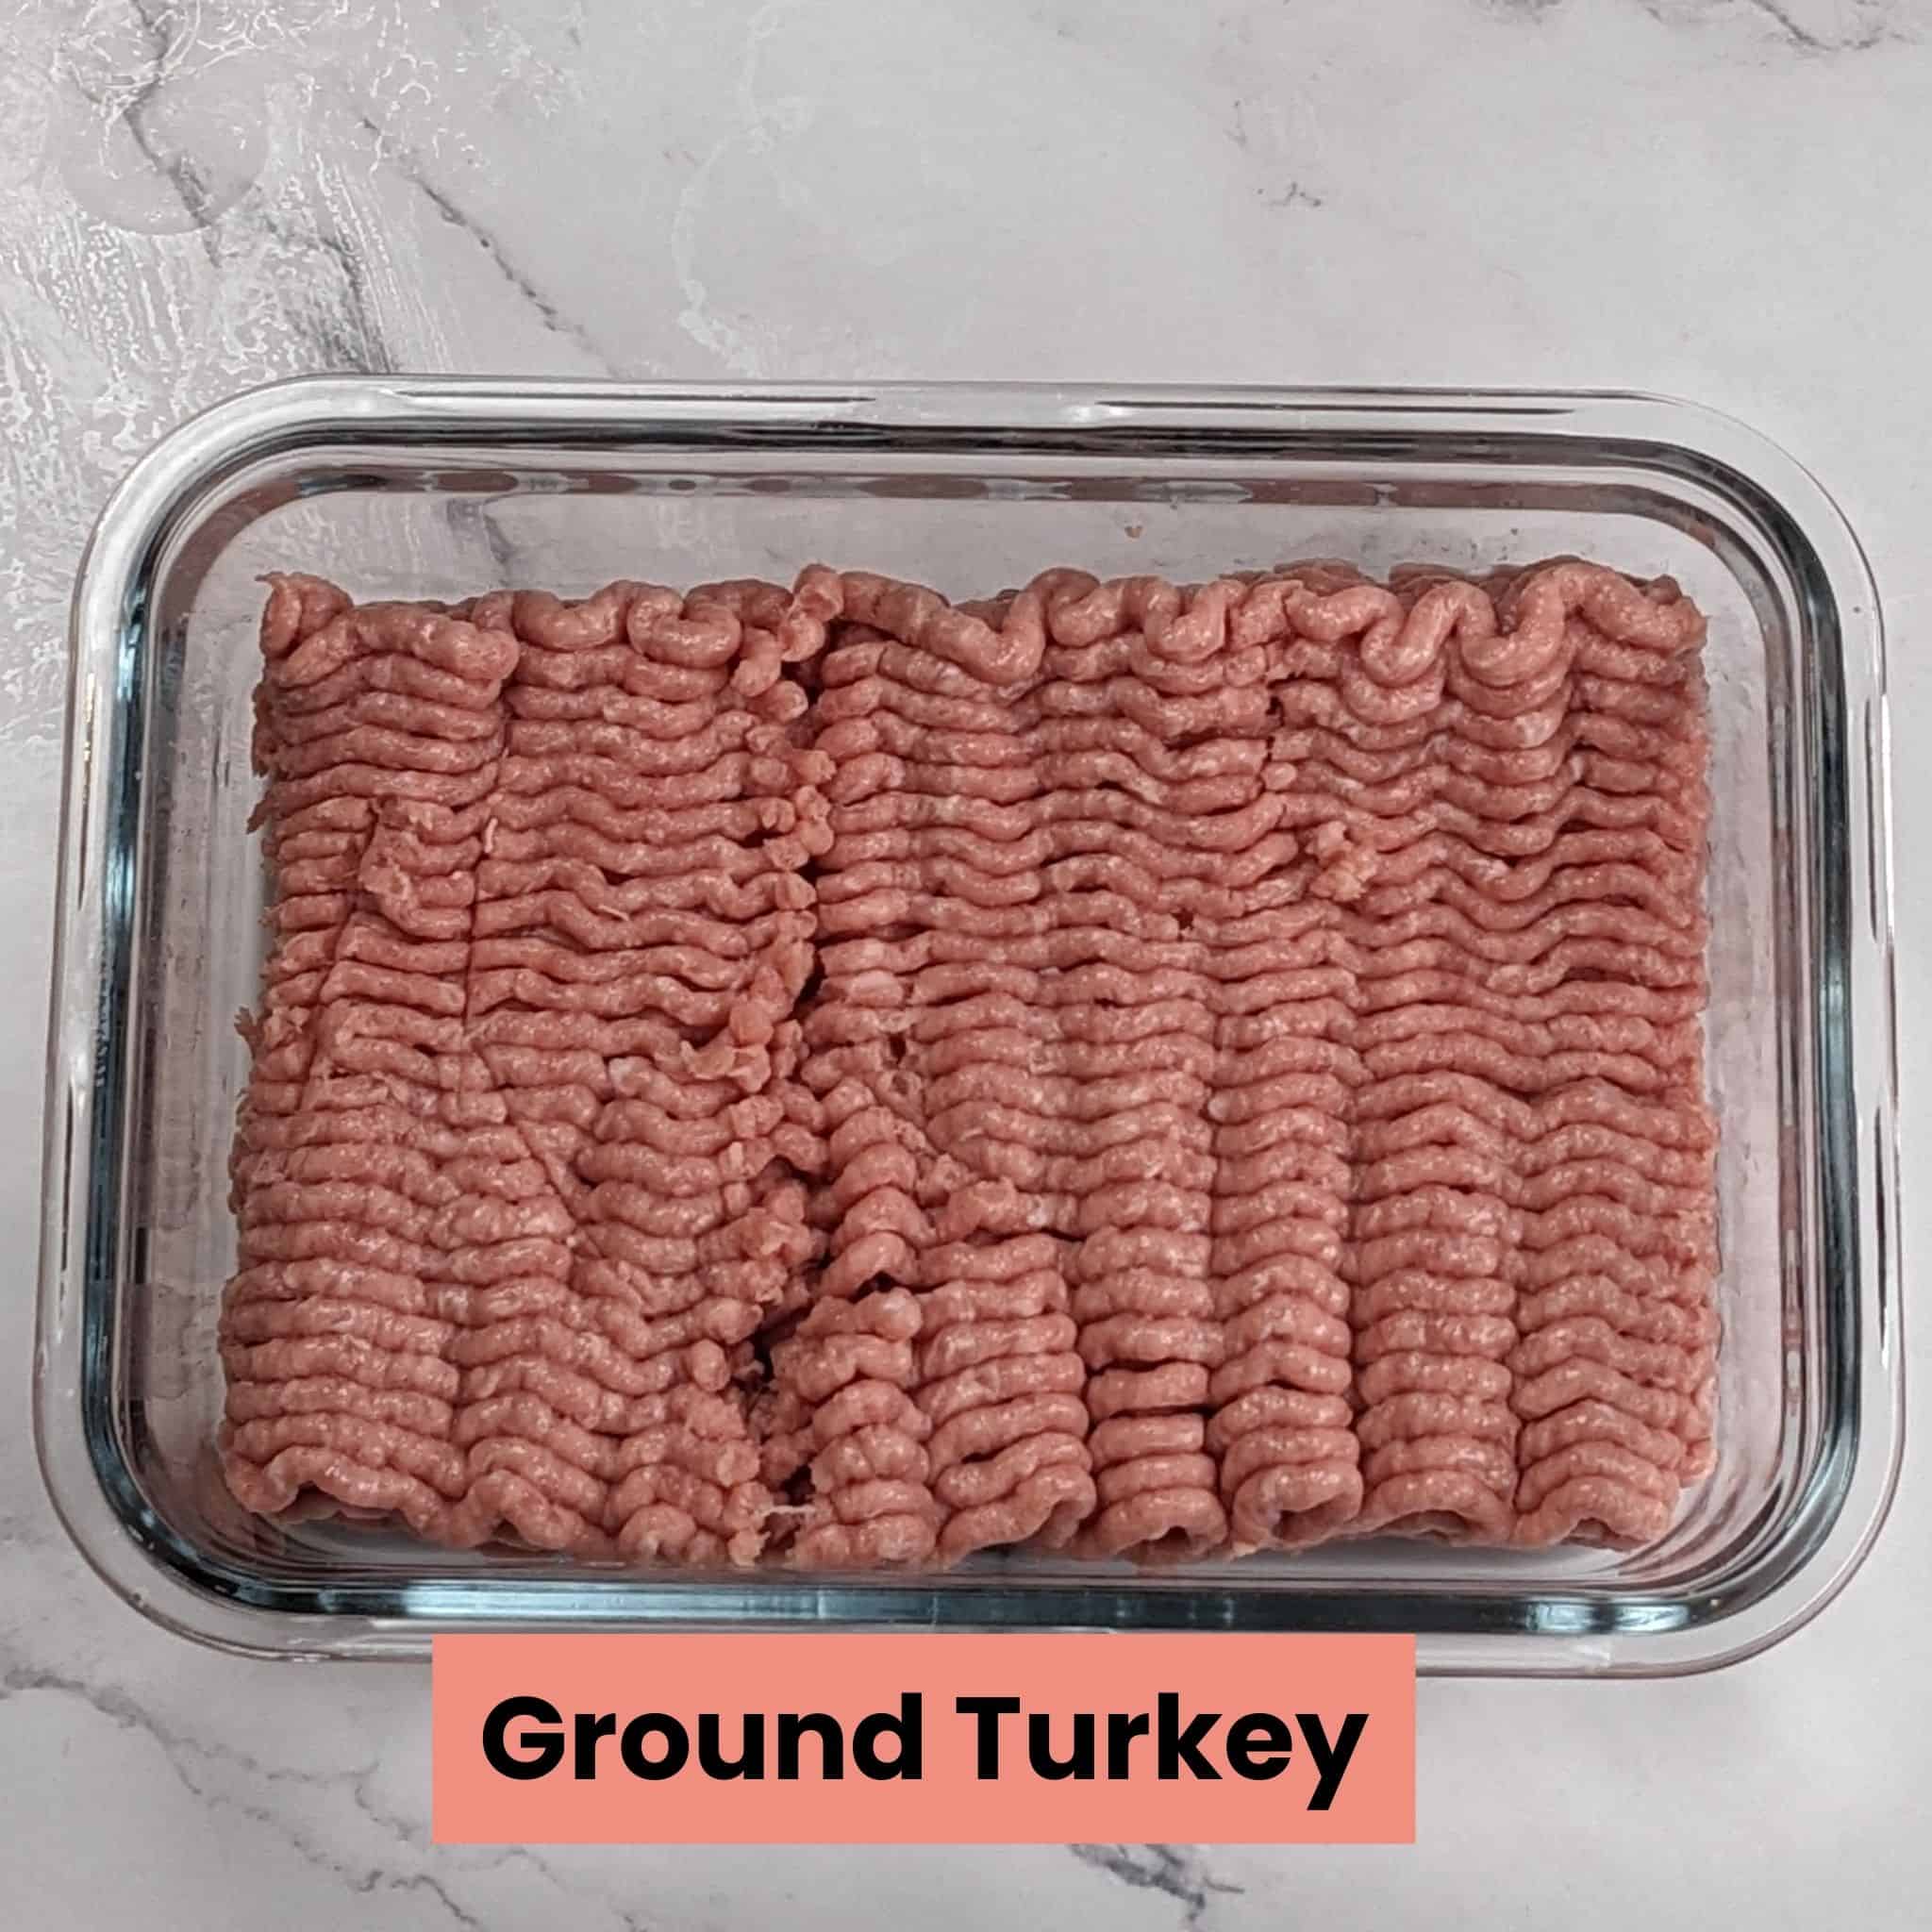 ground turkey in a rectangle glass container.